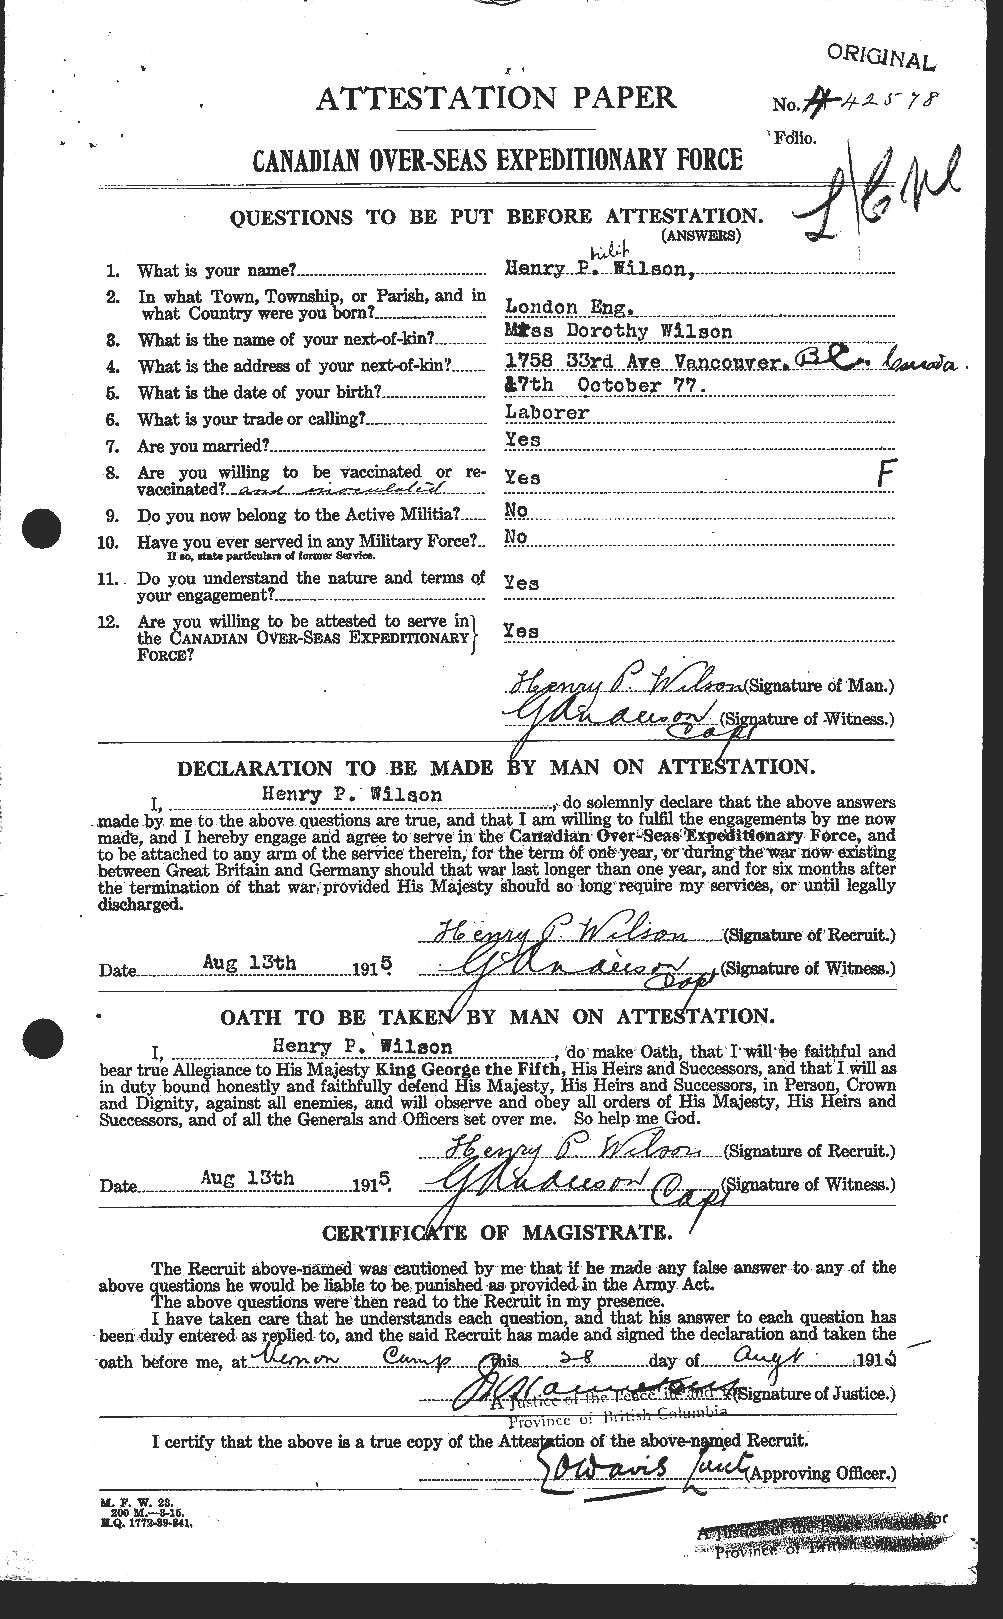 Personnel Records of the First World War - CEF 679539a